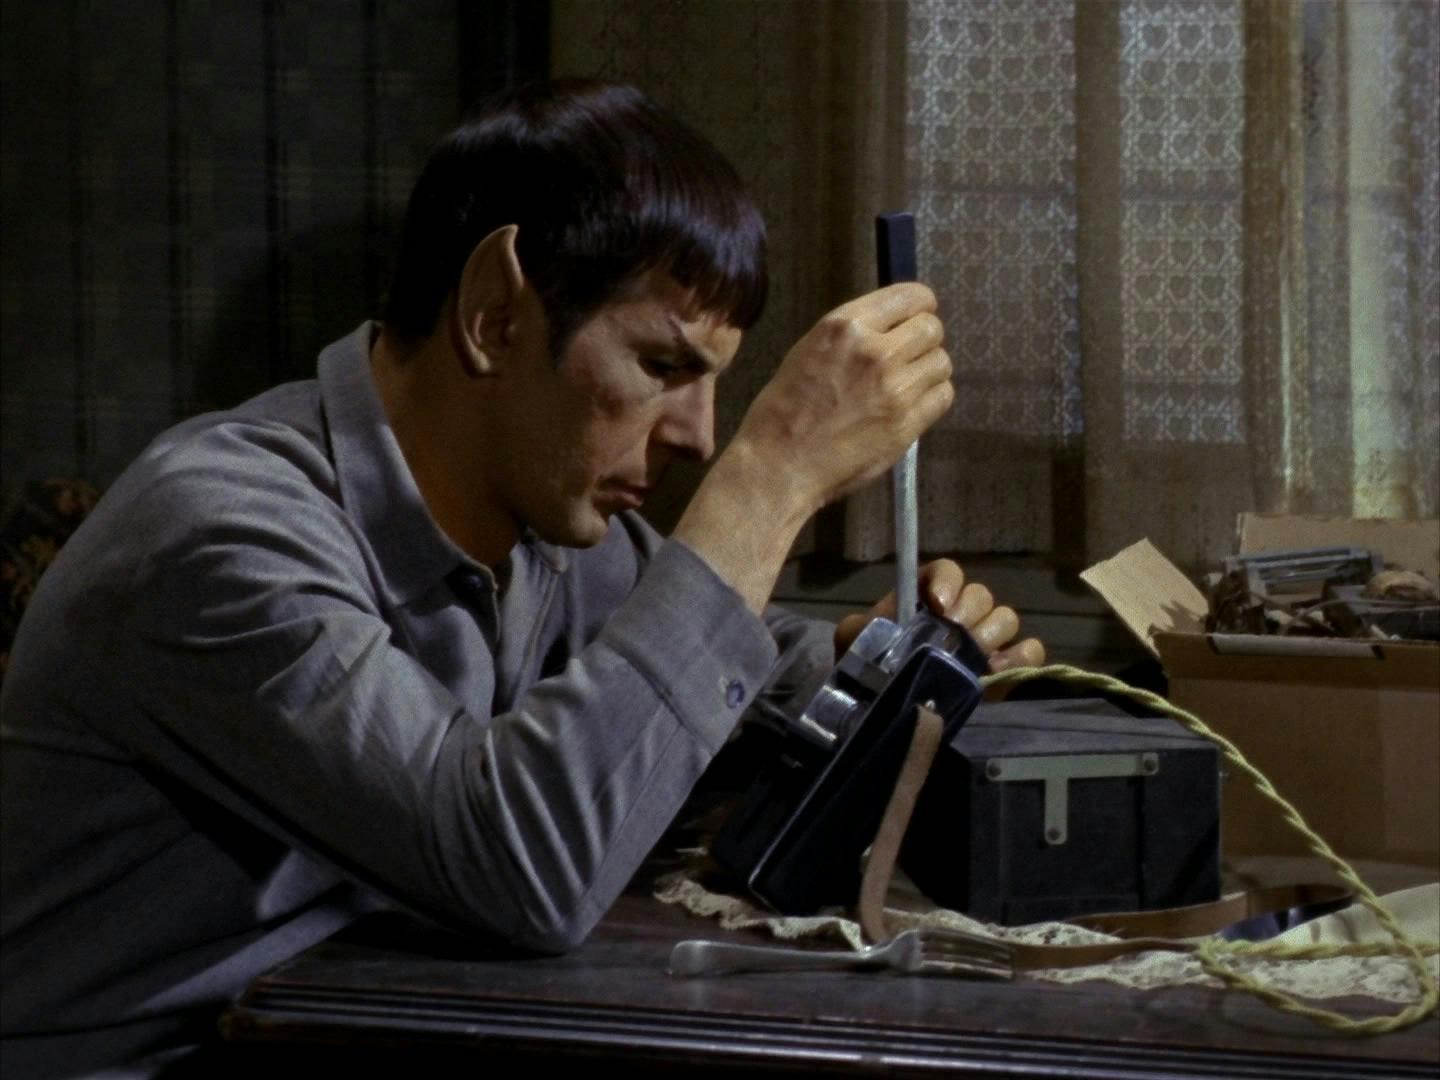 Spock attempts to rebuild a tricorder